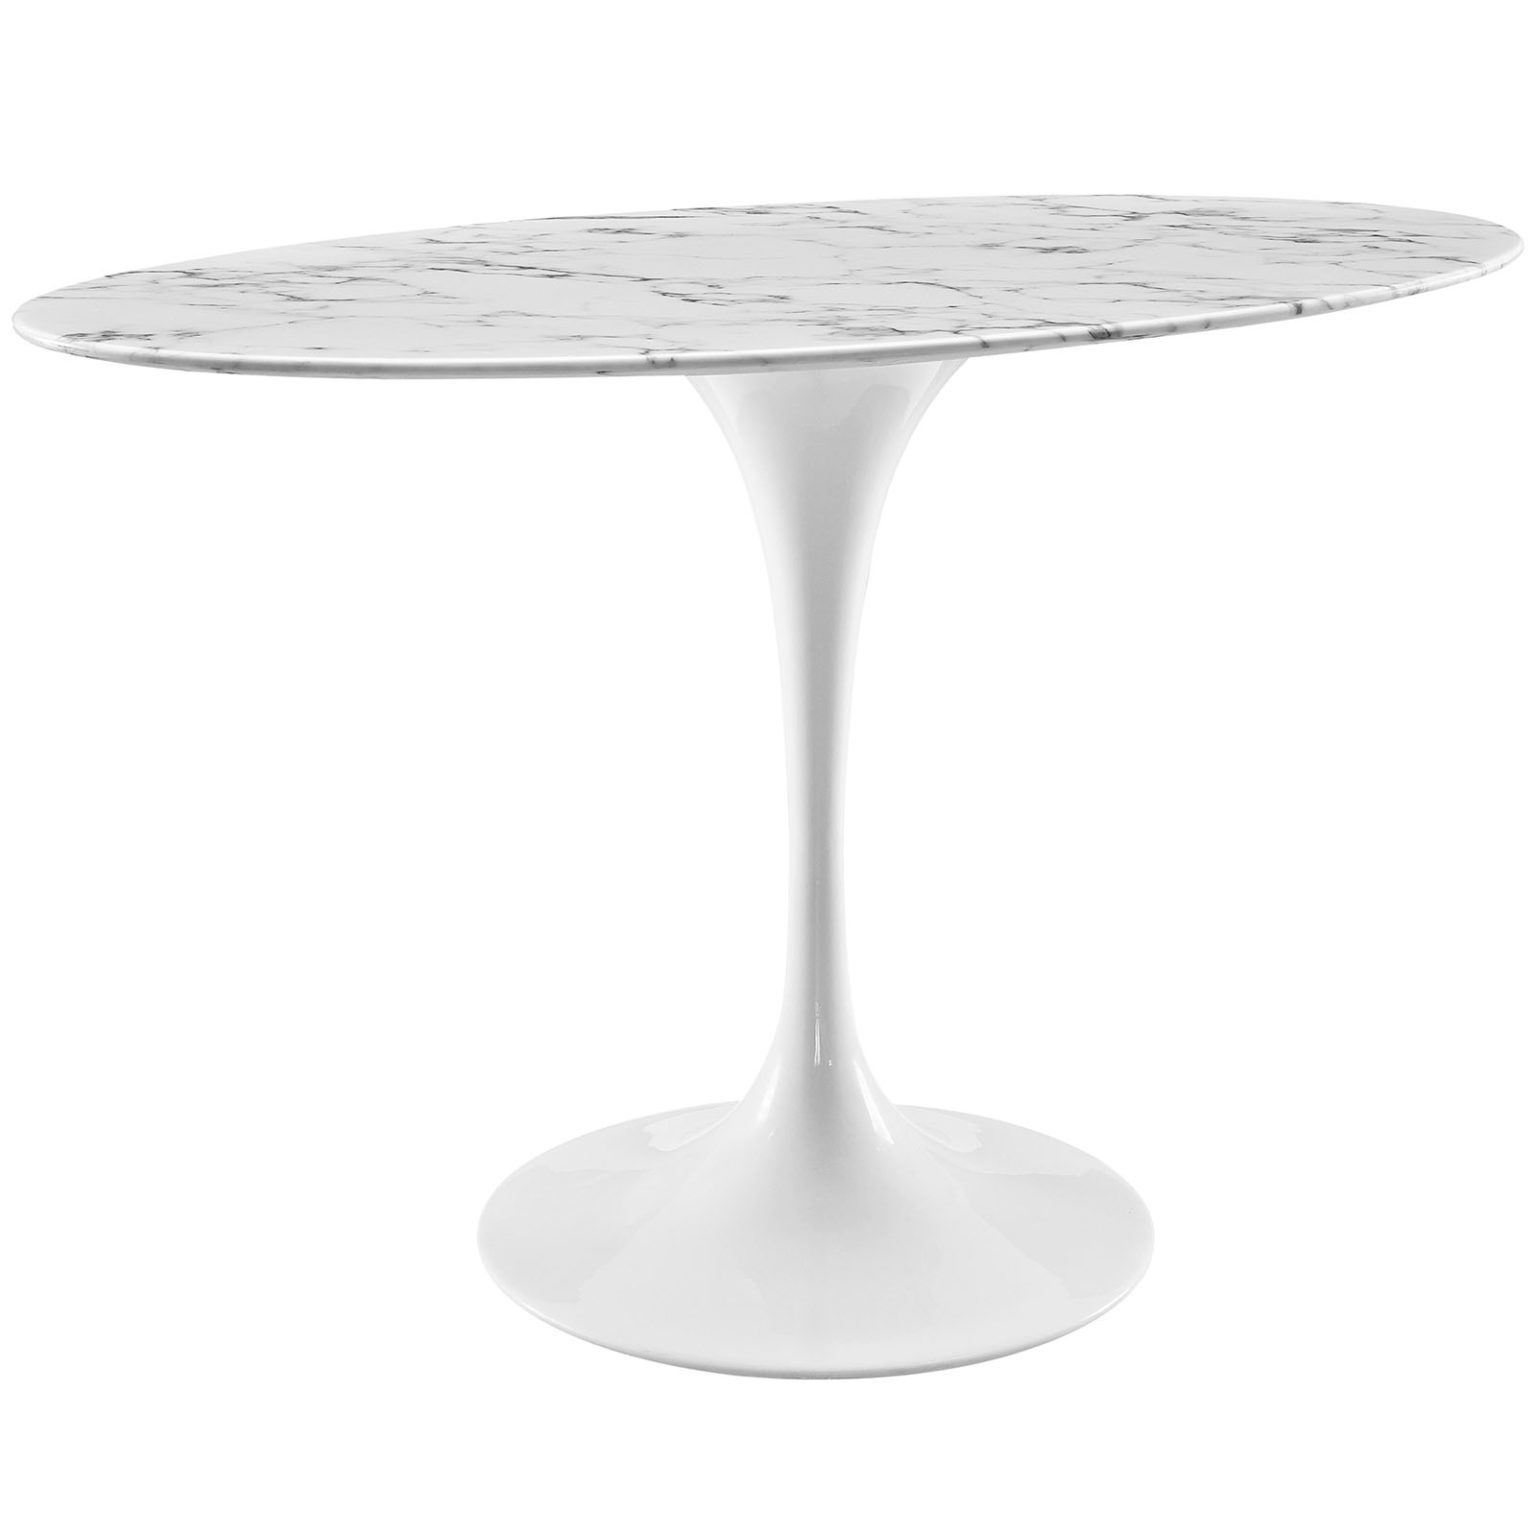 Lippa 48" Oval Artificial Marble Dining Table in White - Hyme Furniture